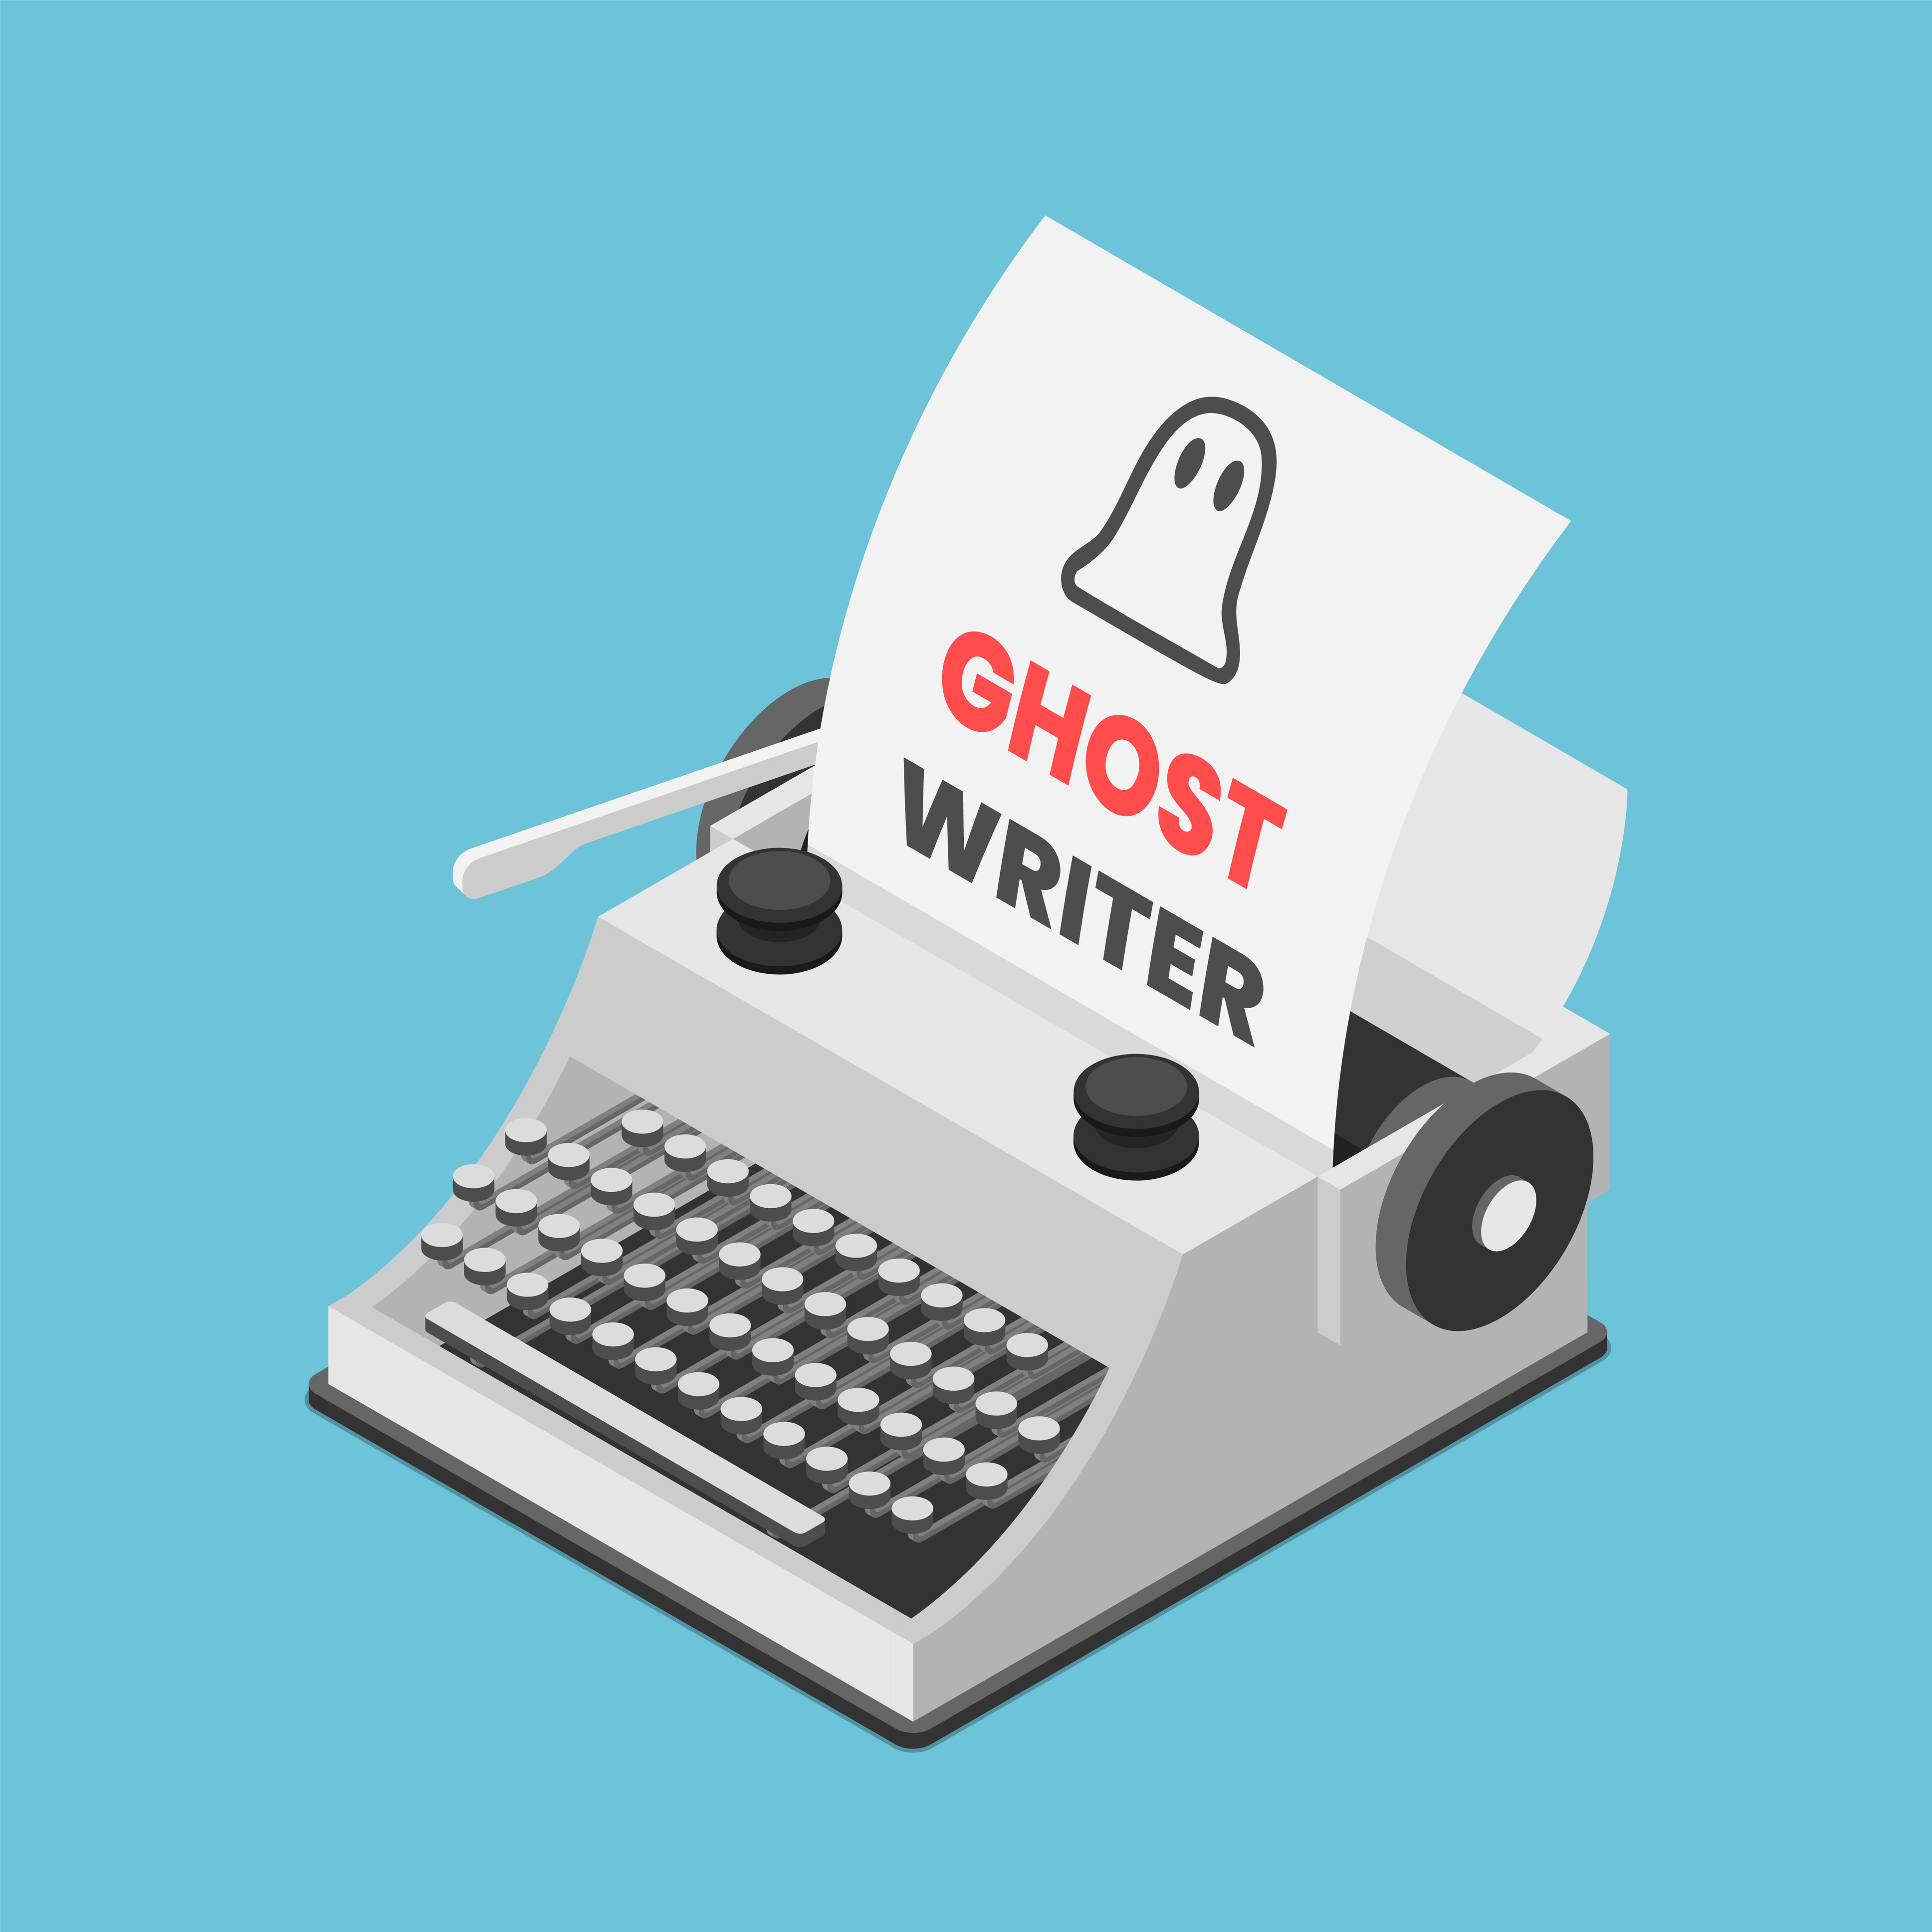 Ghostwriting: Definition, advantages and purpose